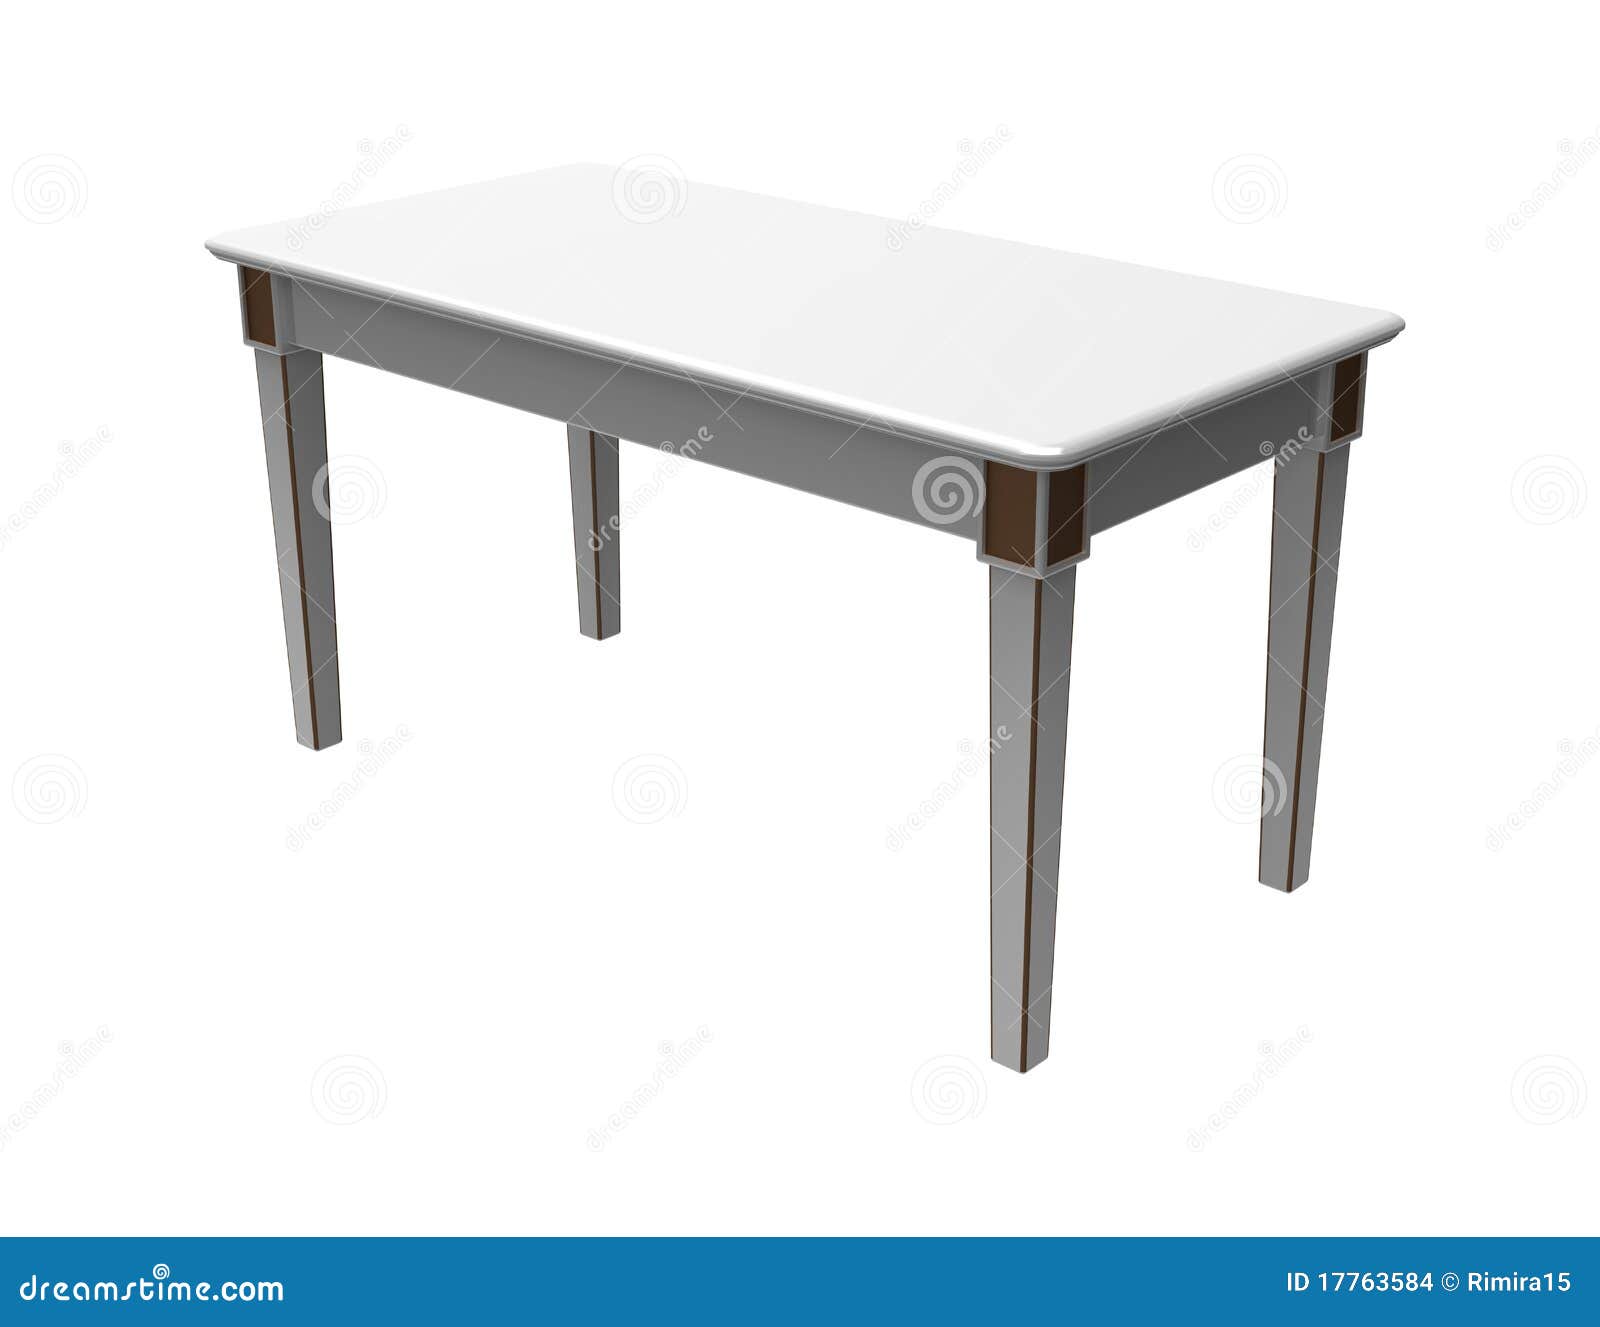 3,180,766 White Table Top Images, Stock Photos, 3D objects, & Vectors